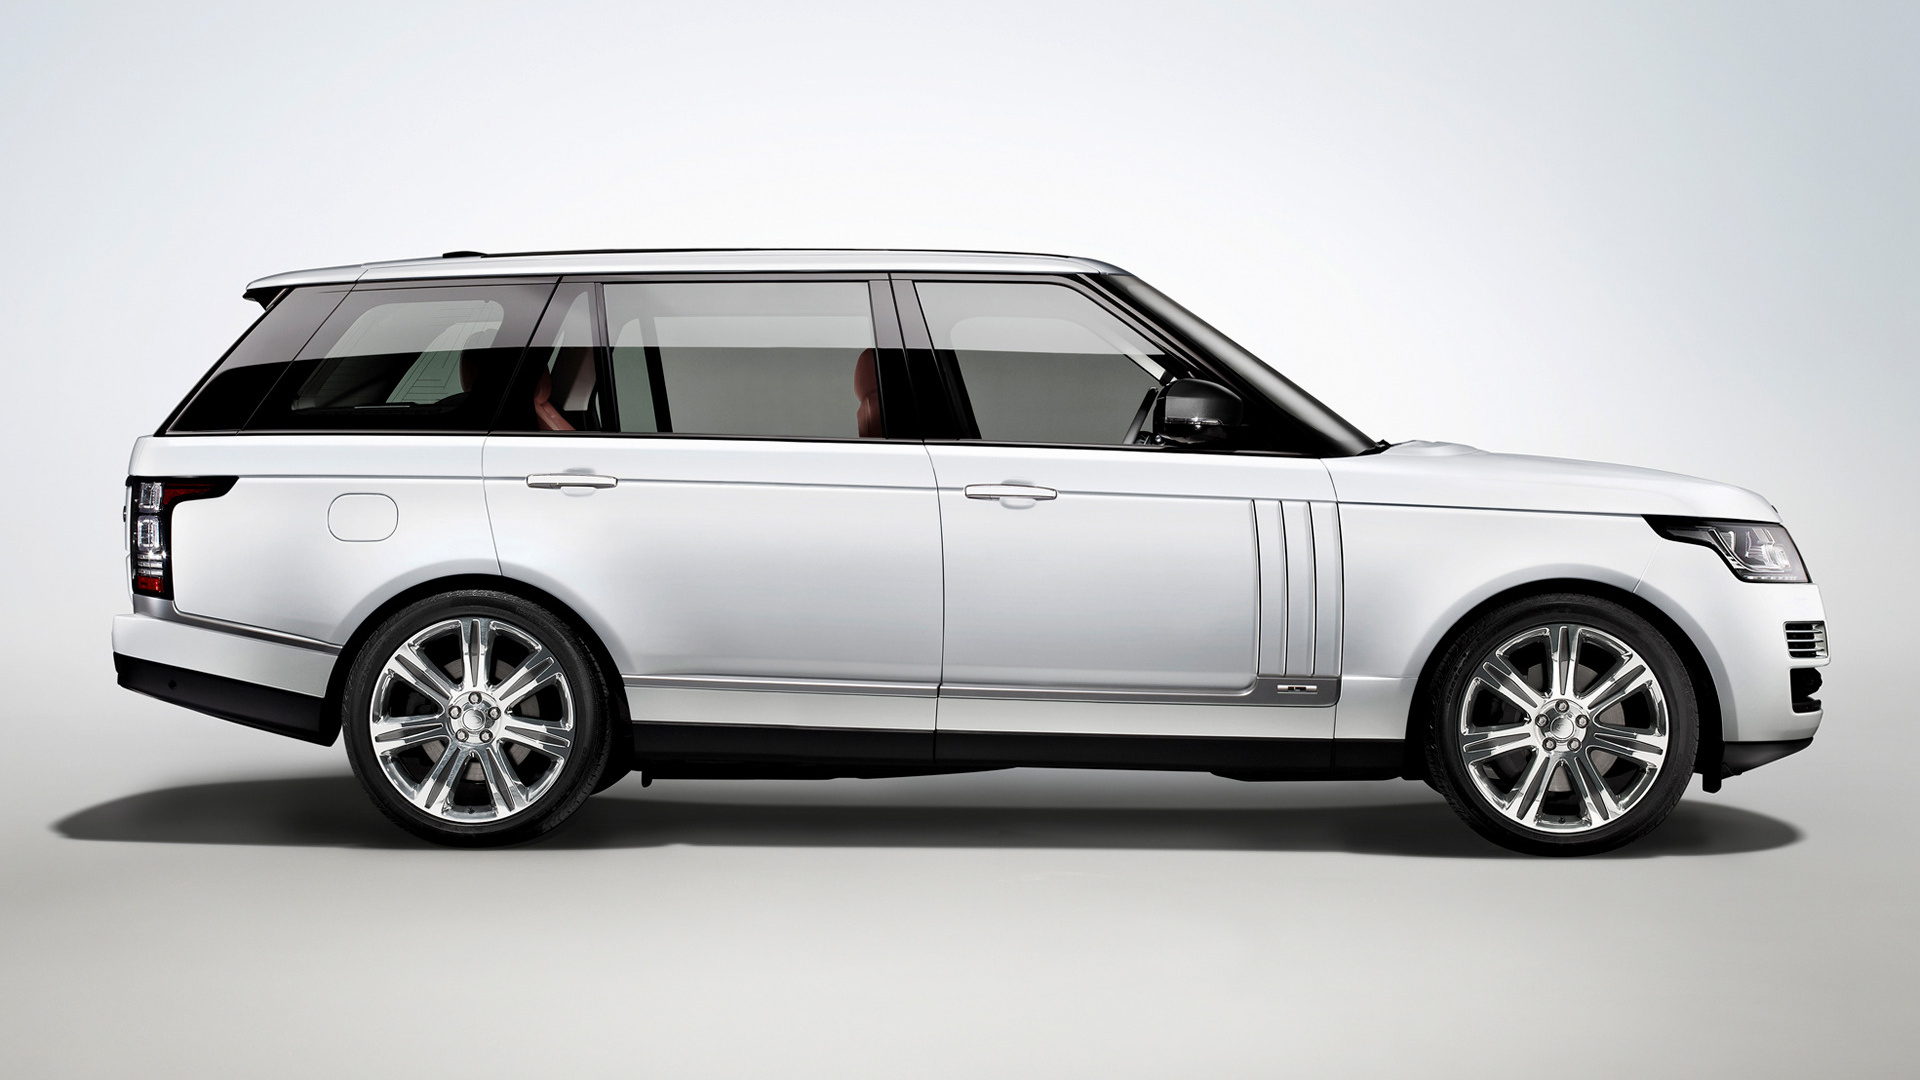 2014 Range Rover Autobiography Black [LWB] - Wallpapers and HD Images ...